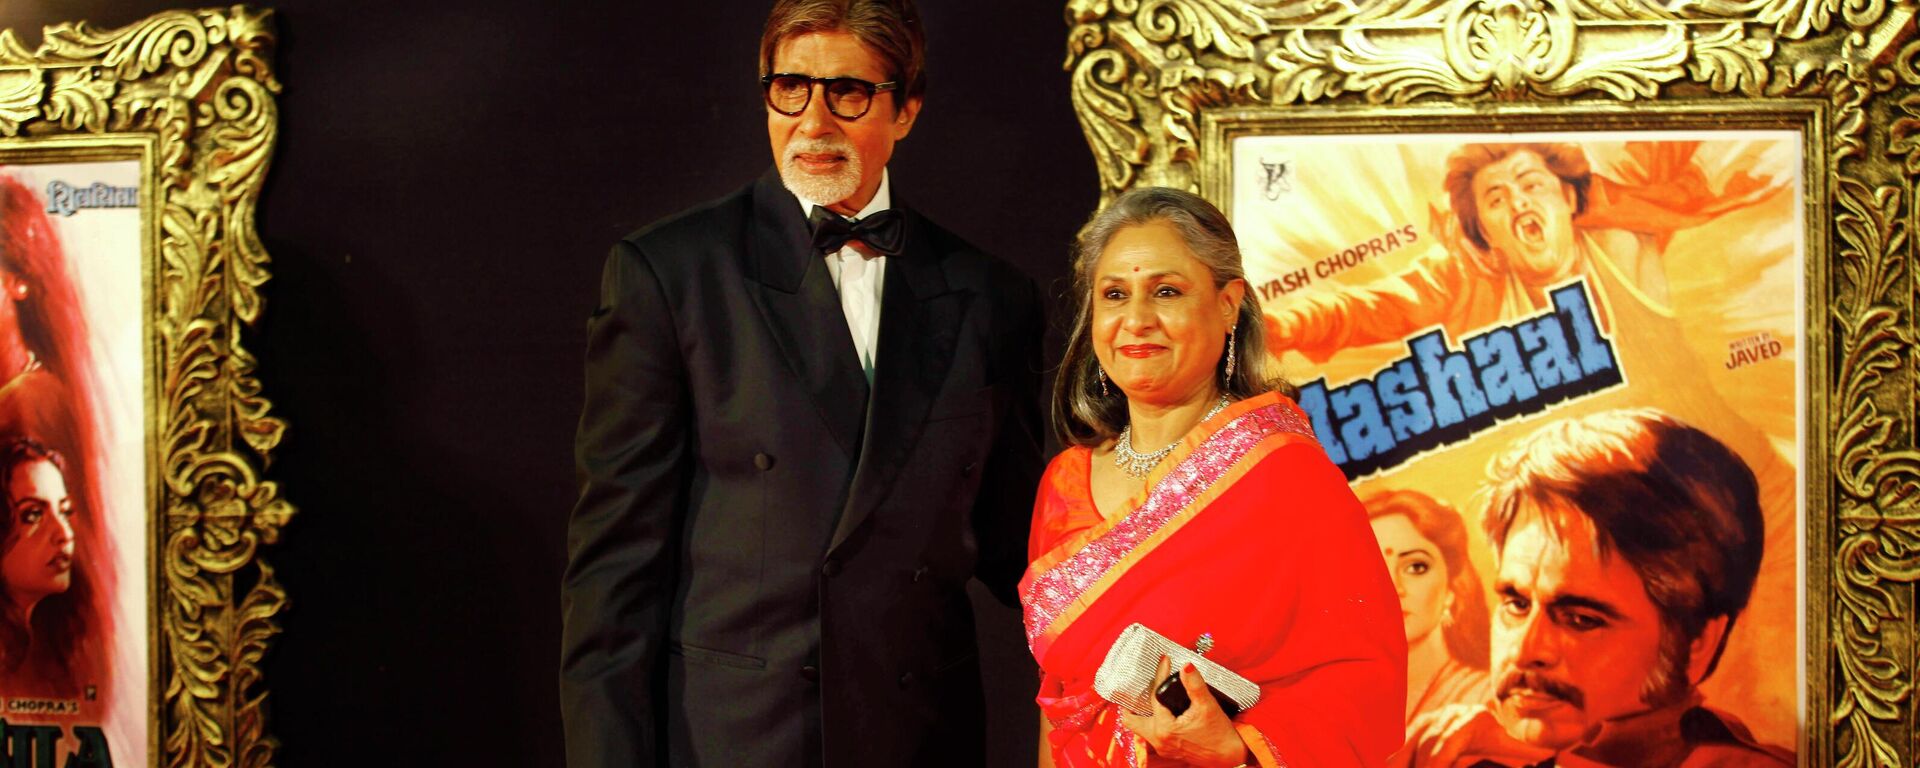 In this Monday, Nov. 12, 2012 photo, Bollywood megastar Amitabh Bachchan and his wife Jaya Bachchan pose for photographs during the premiere of the film Jab Tak Hai Jaan or As long as I Am Alive in Mumbai, India. - Sputnik International, 1920, 17.10.2022